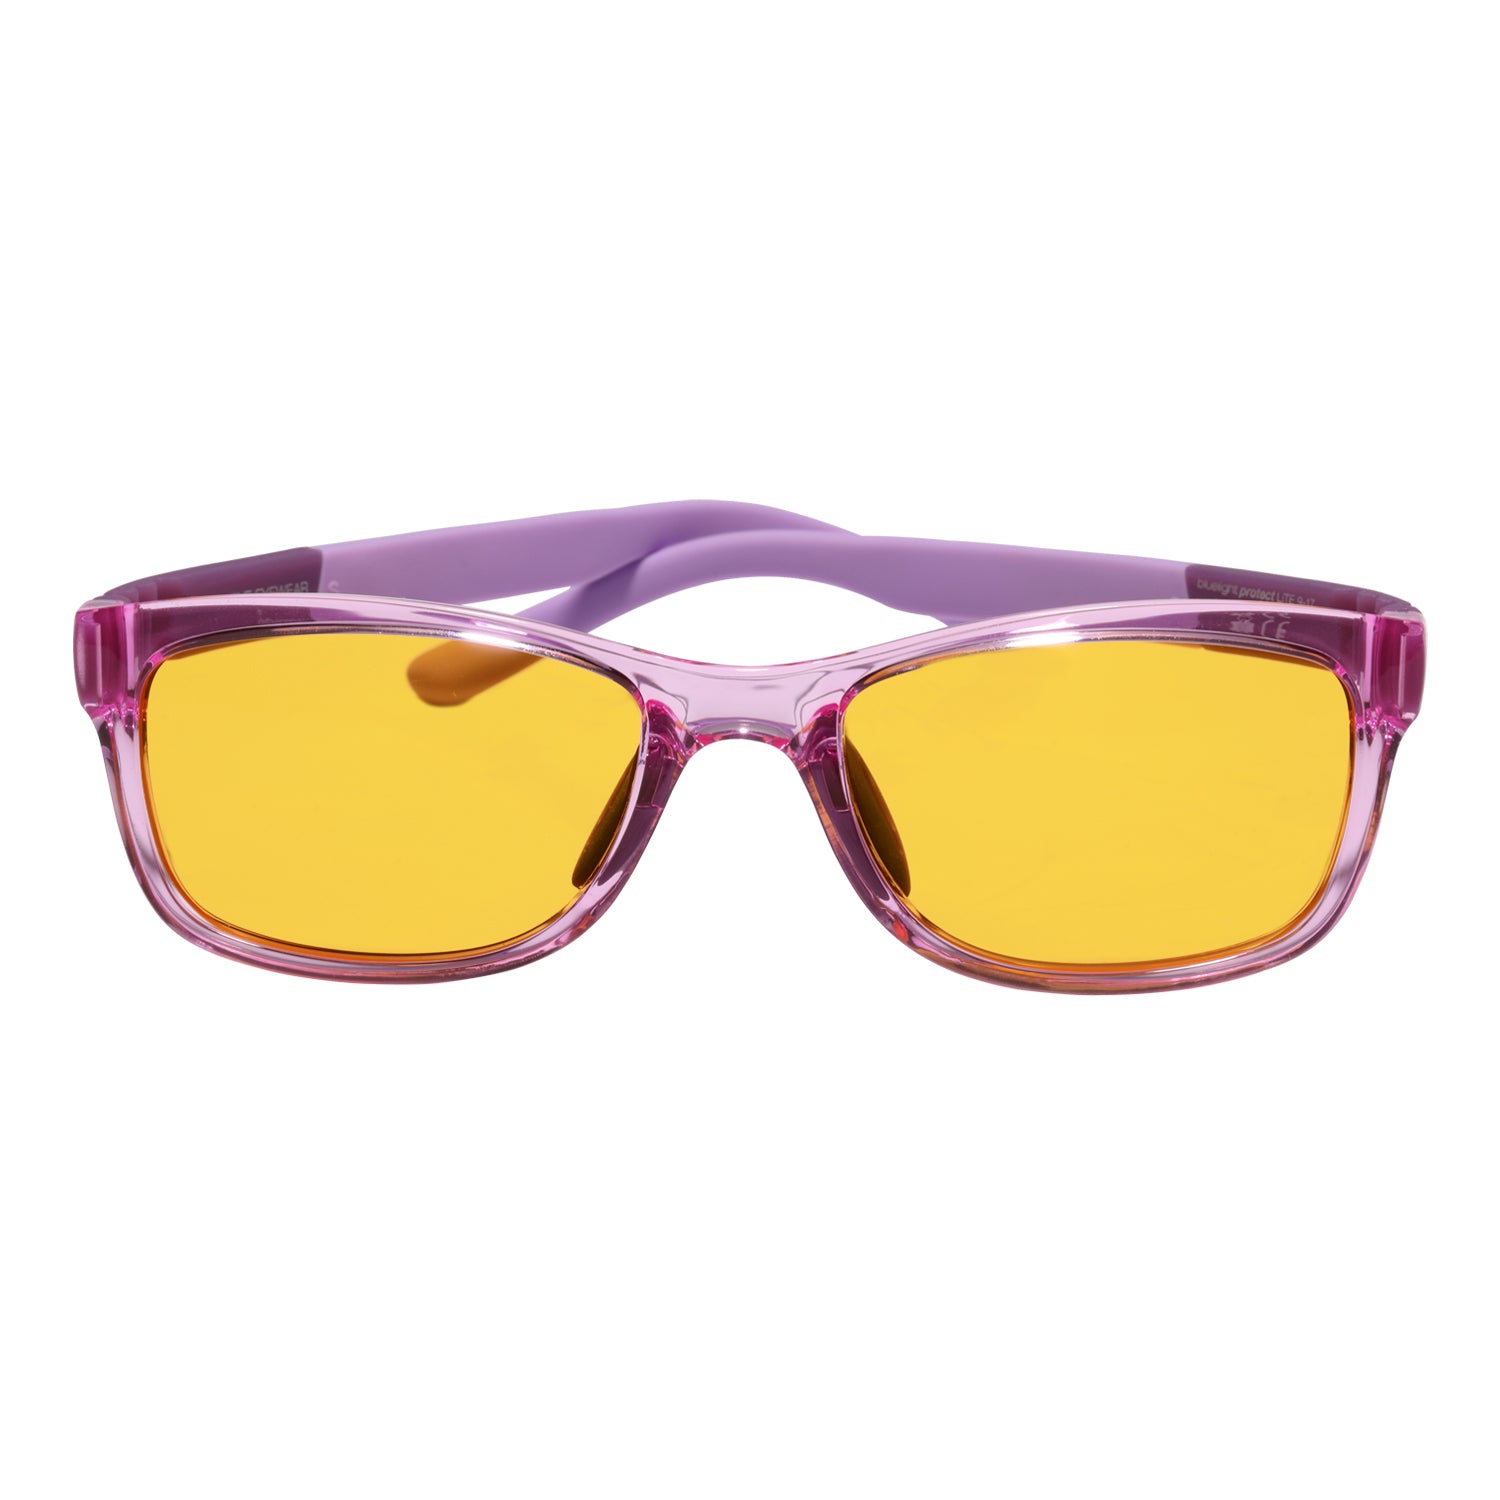 PRiSMA KiDS Blue Light Blocking Glasses for Children & Small Adults -  Strong and flexible nylon frame - lilac